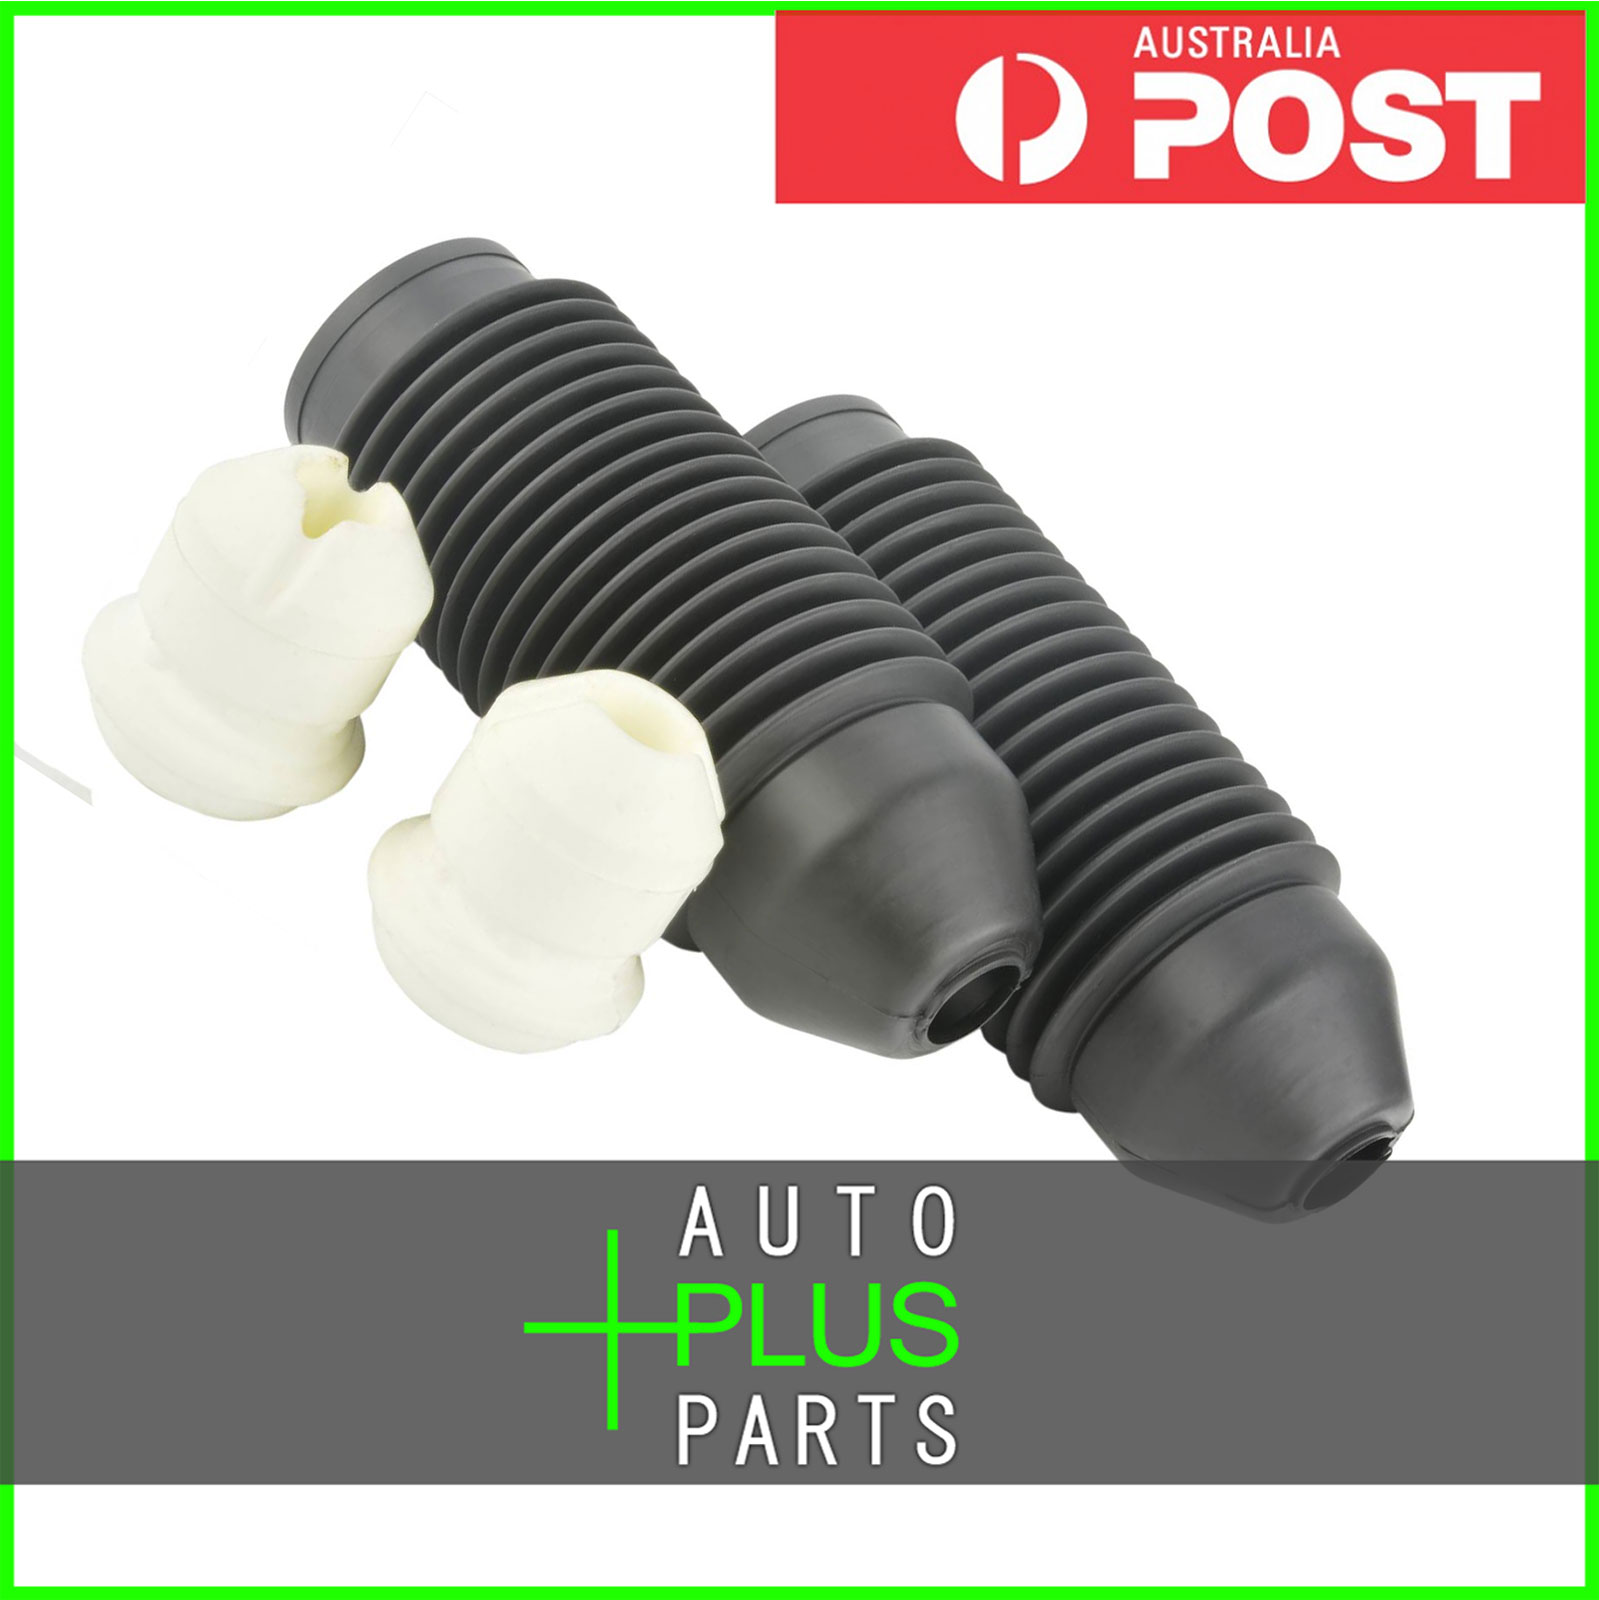 Fits VW BORA/VARIANT/4MOTION BOOT WITH JOUNCE BUMPER FRONT SHOCK ABSORBER KIT -  Product Photo